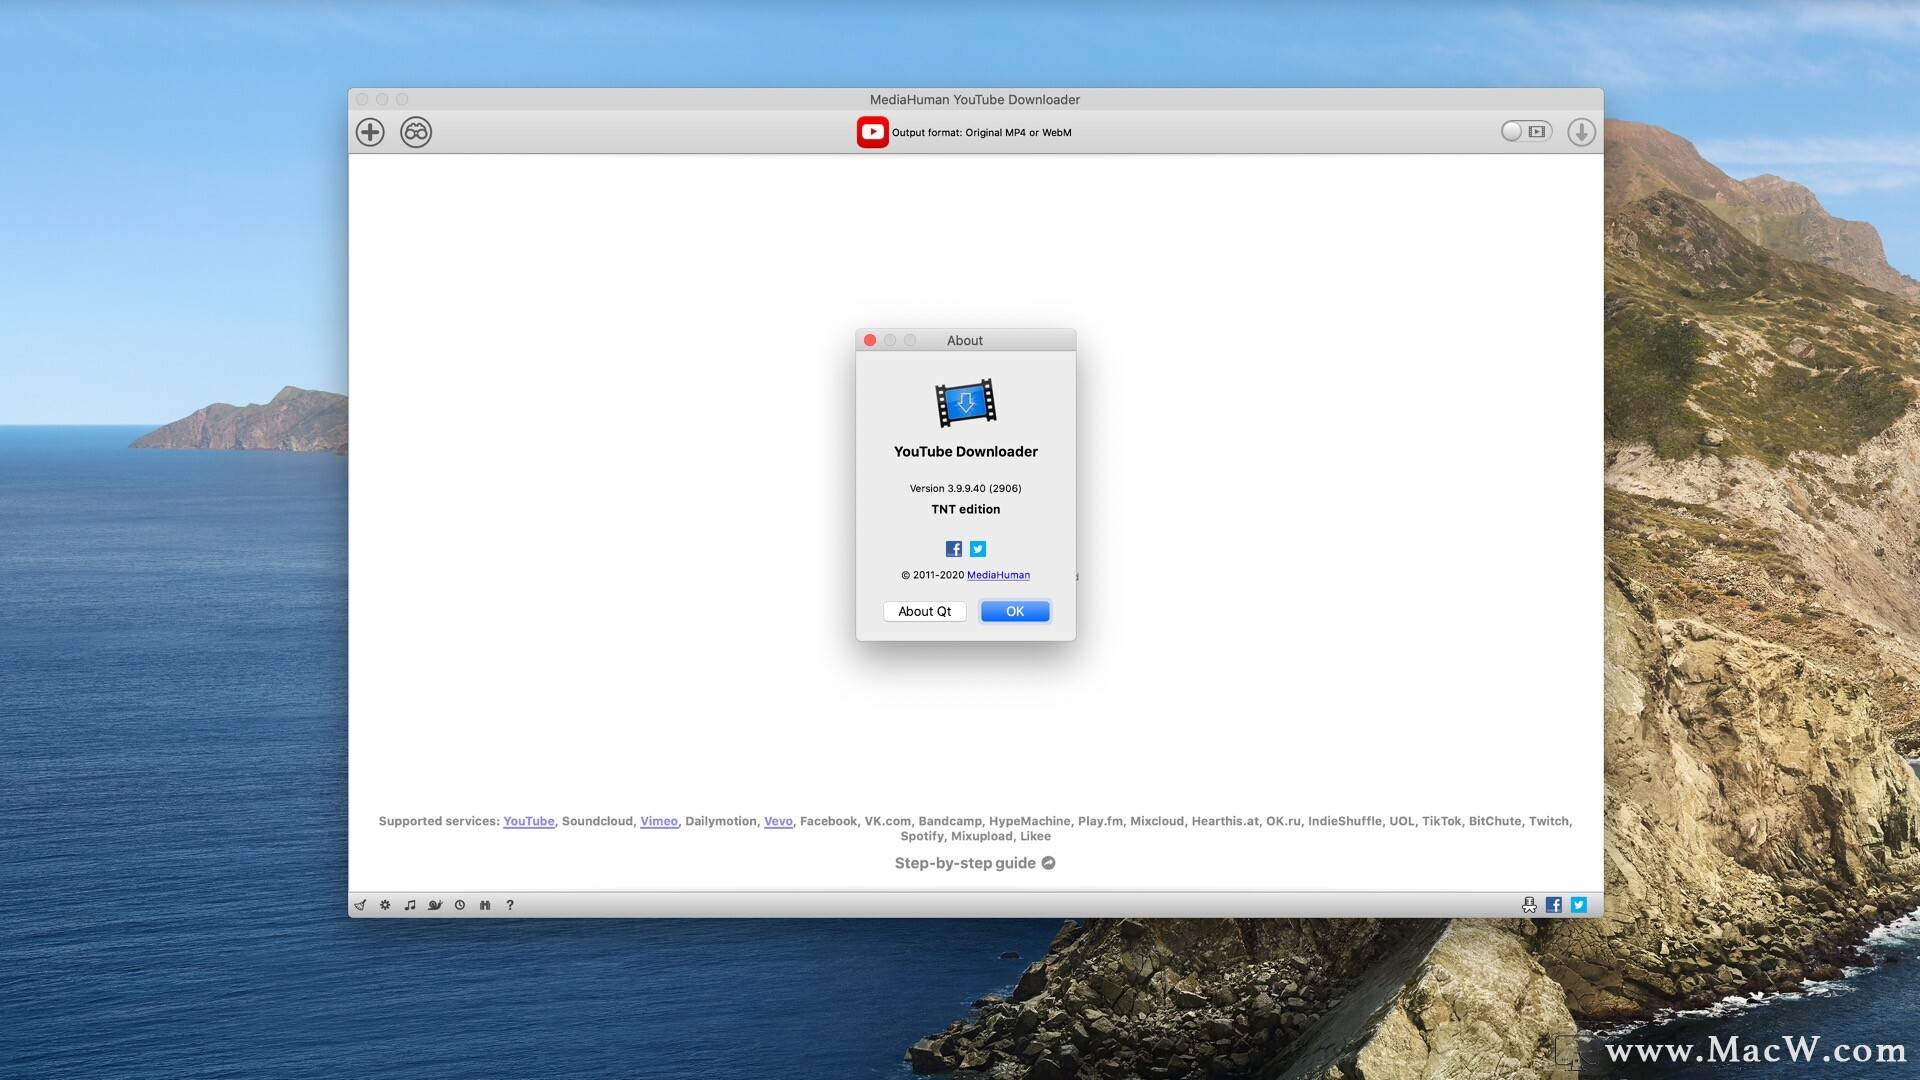 instal the new version for mac MediaHuman YouTube Downloader 3.9.9.86.2809